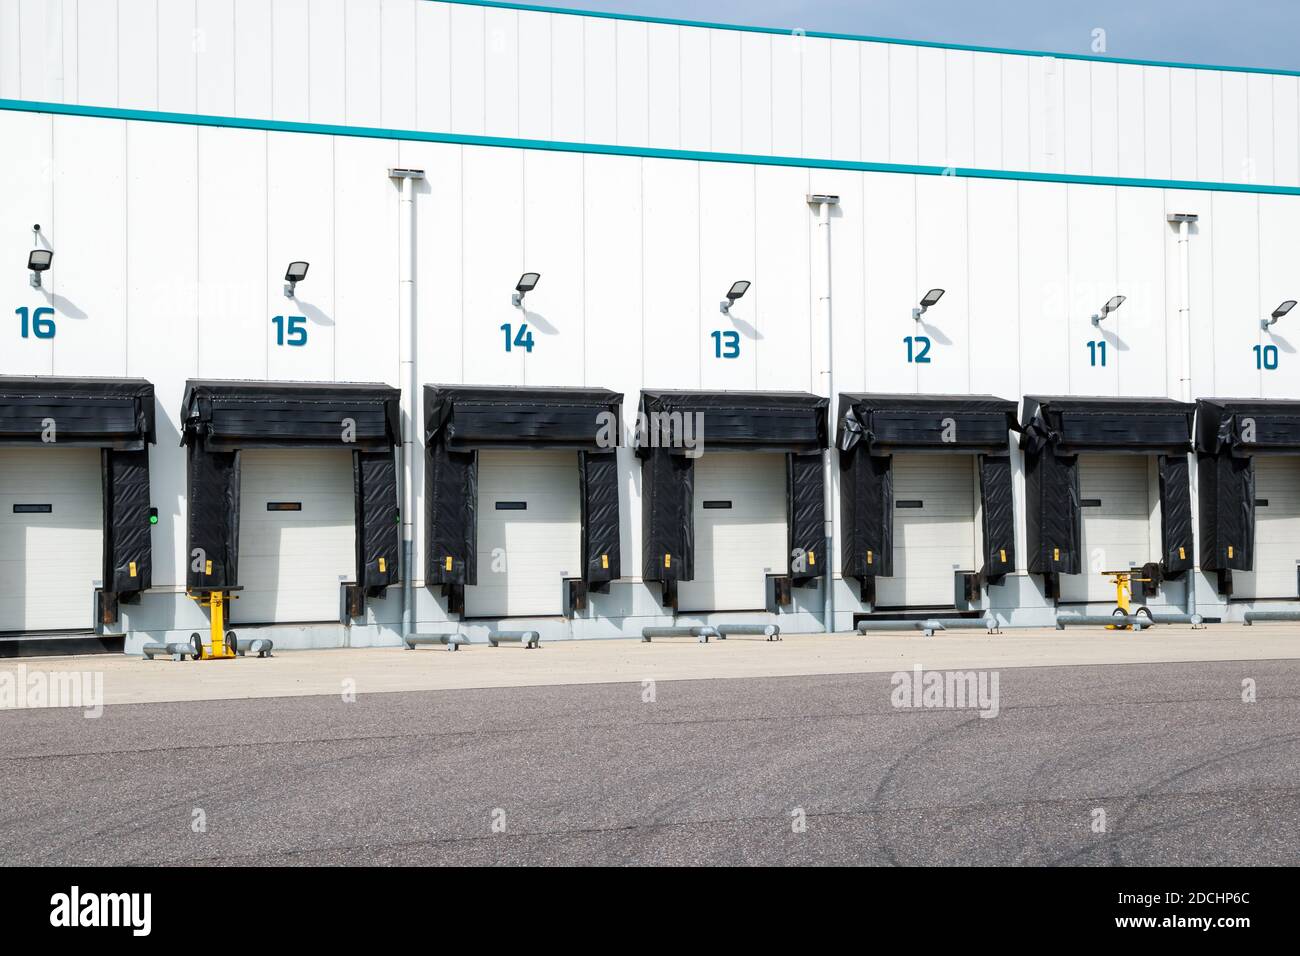 Row of loading docks with shutter doors at an industrial warehouse. Stock Photo